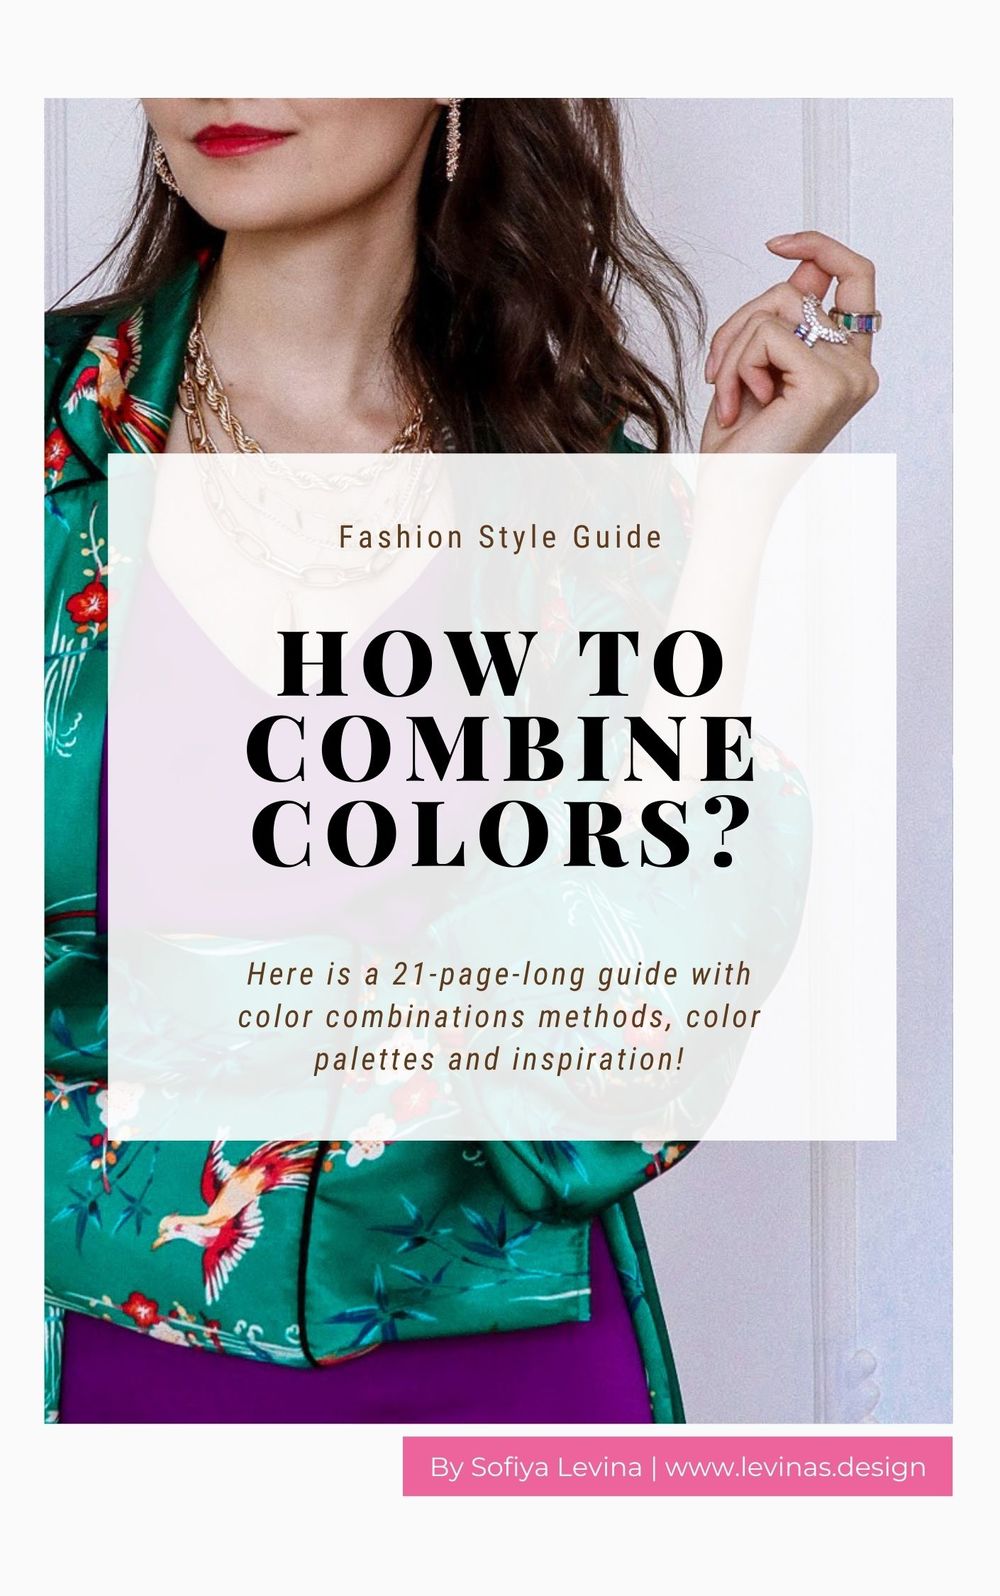 How to Combine & Mix Colors to Create Stunning Looks?